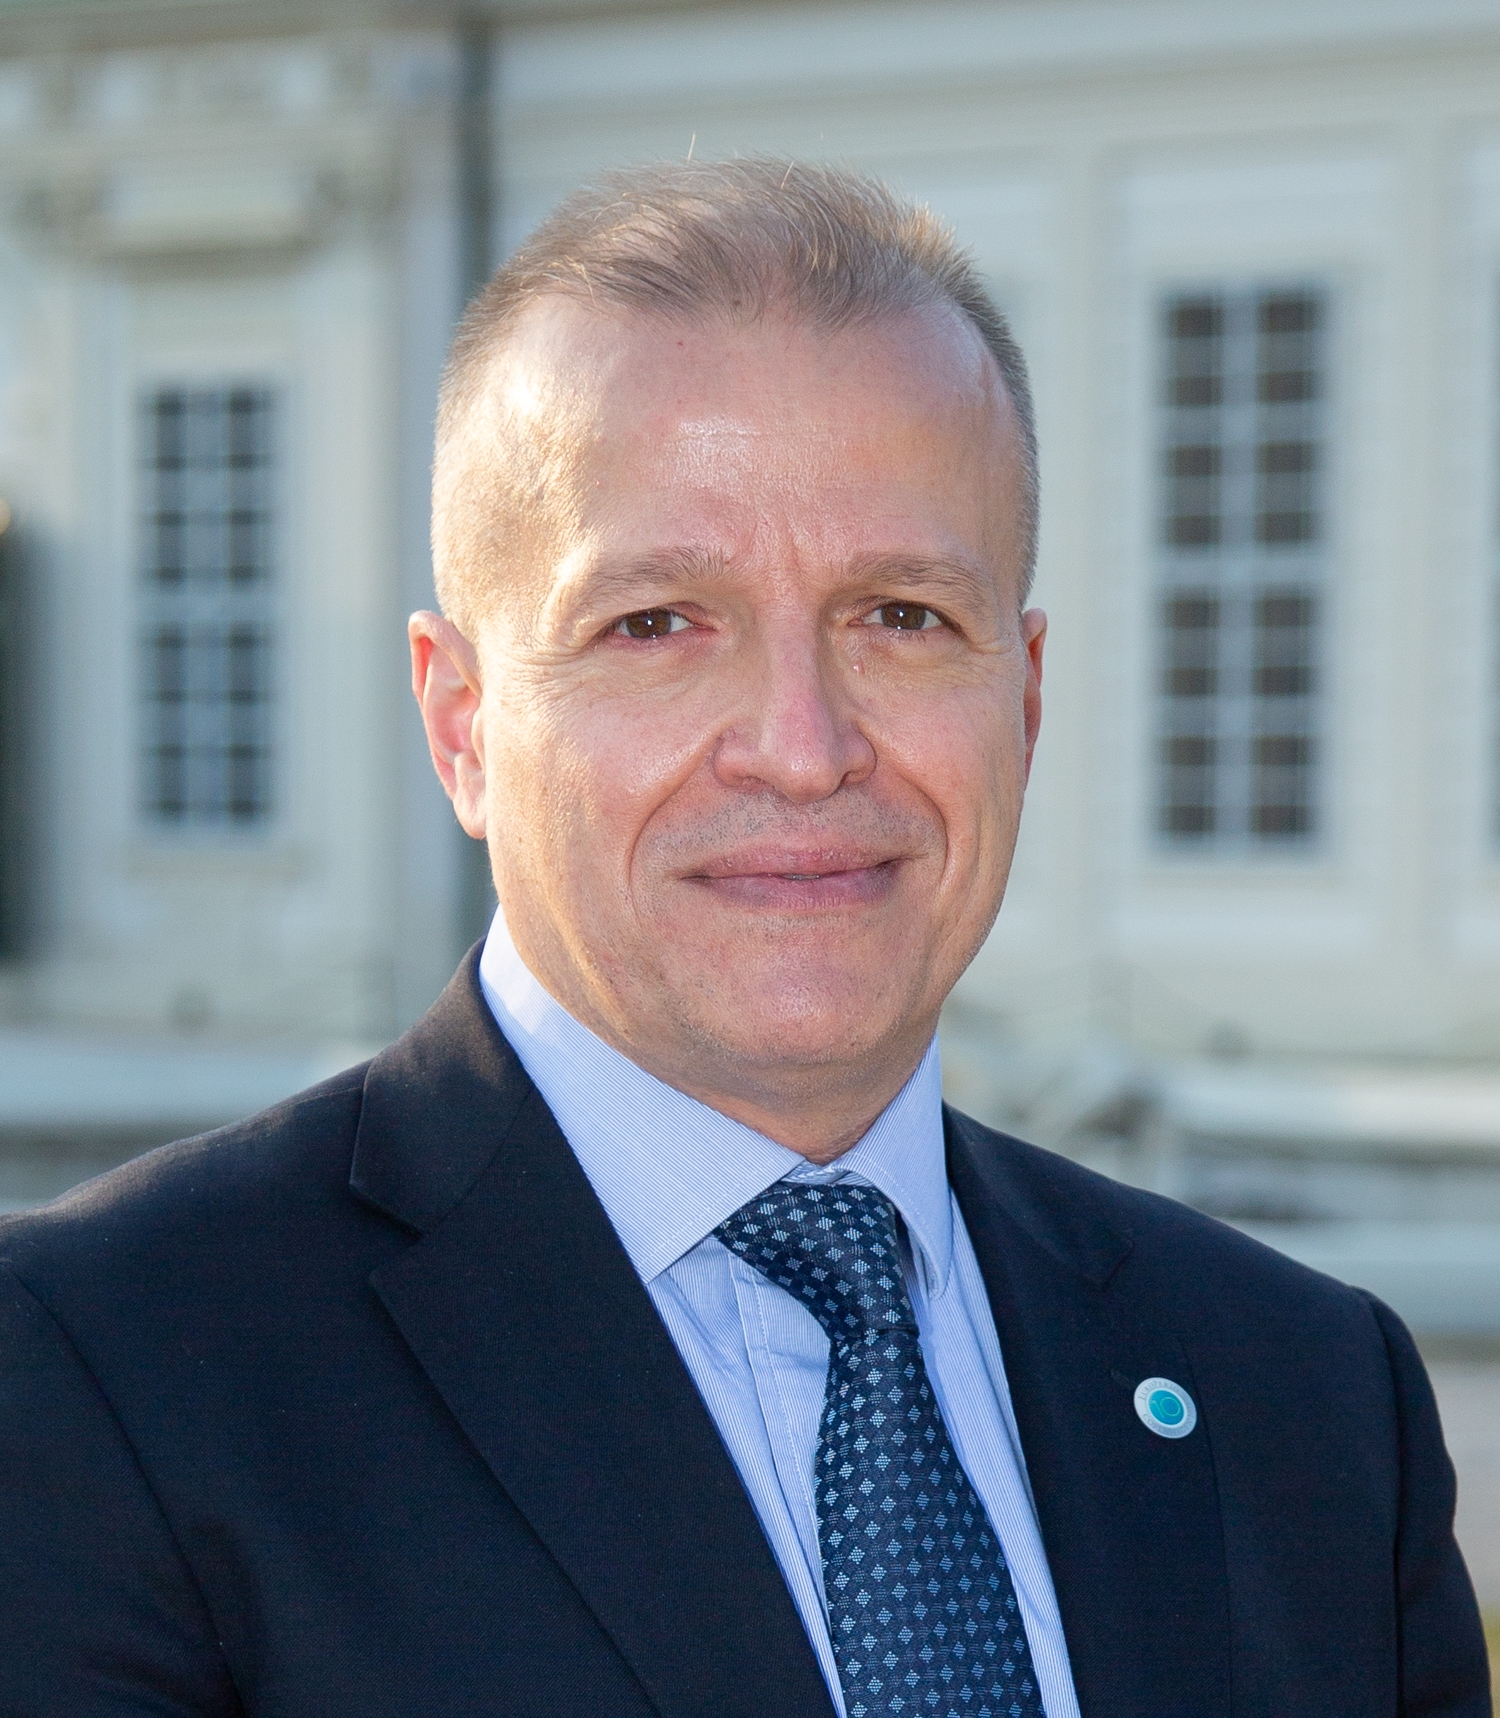 Professor Andreas Stavropoulos is new President of the EFP